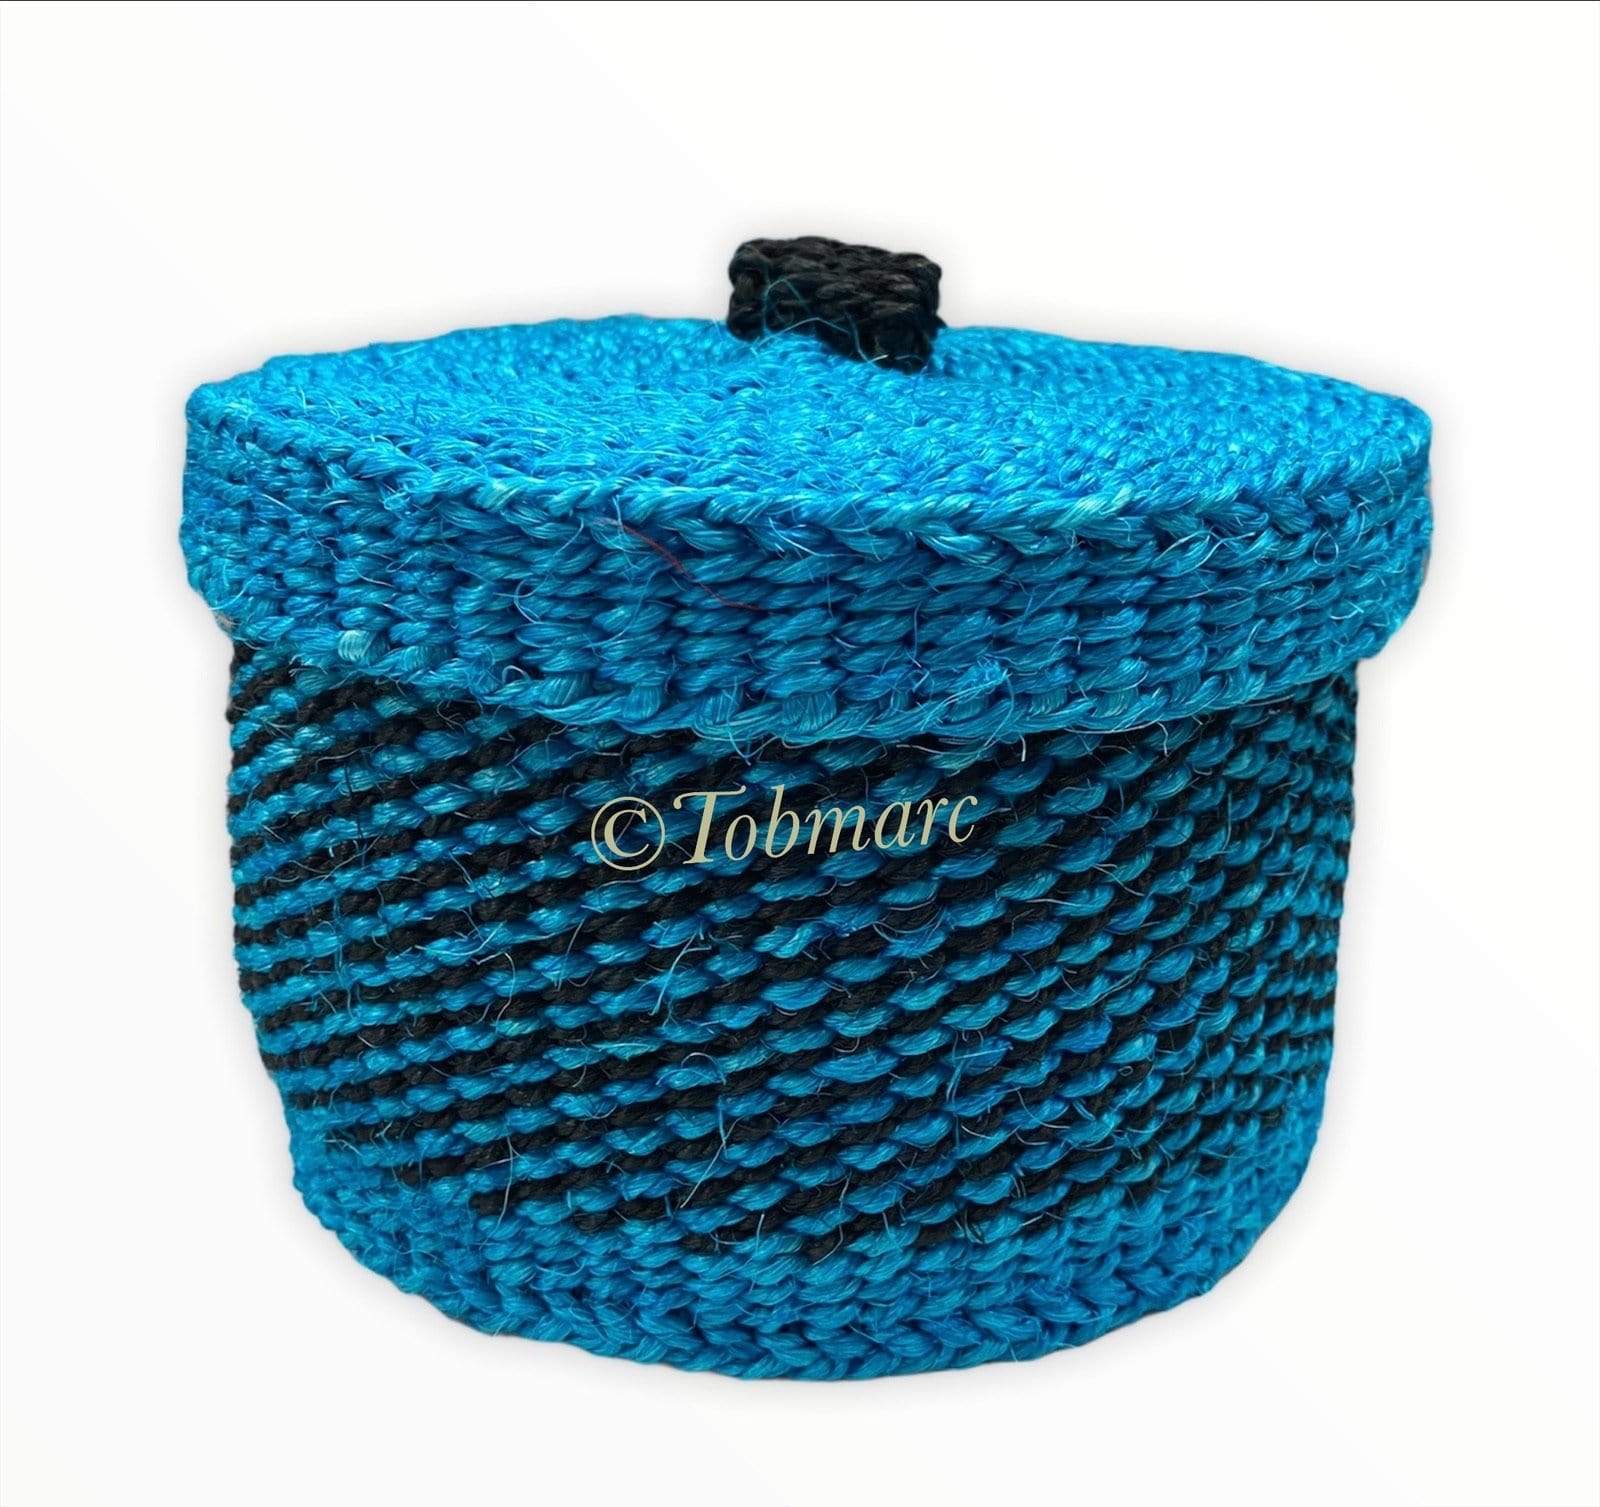 Tobmarc Home Decor & Gifts  Blue and Black TWIN-Small Baskets with a Lid, basket storage, Handwoven Mini Basket